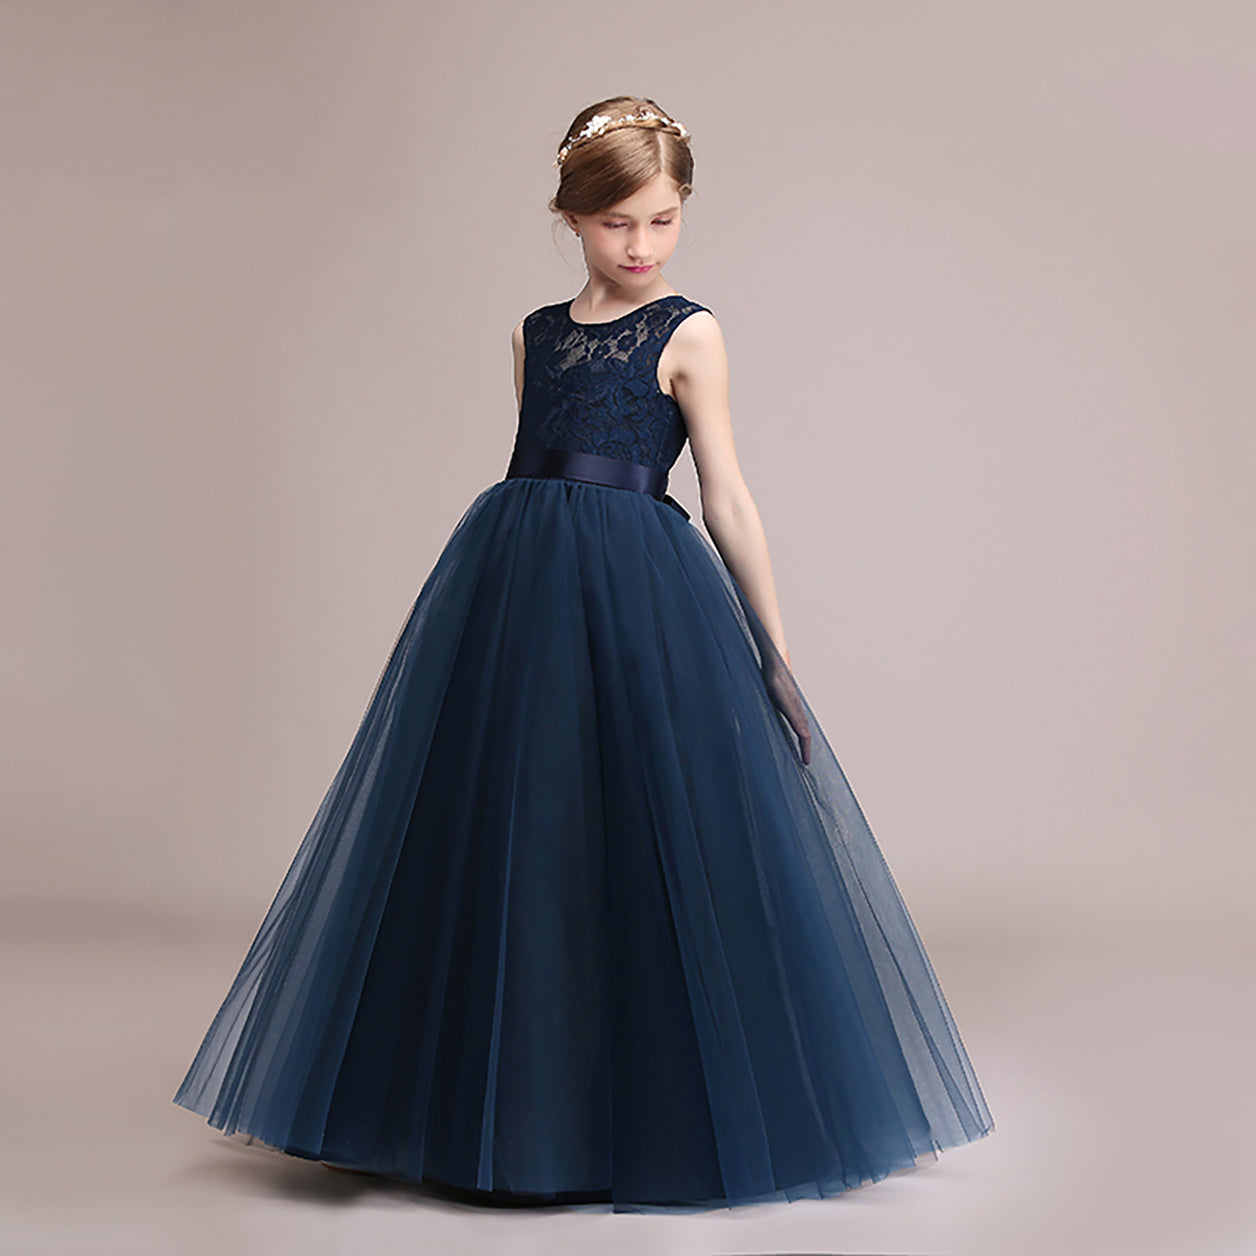 Navy Blue Lace Tulle Dress